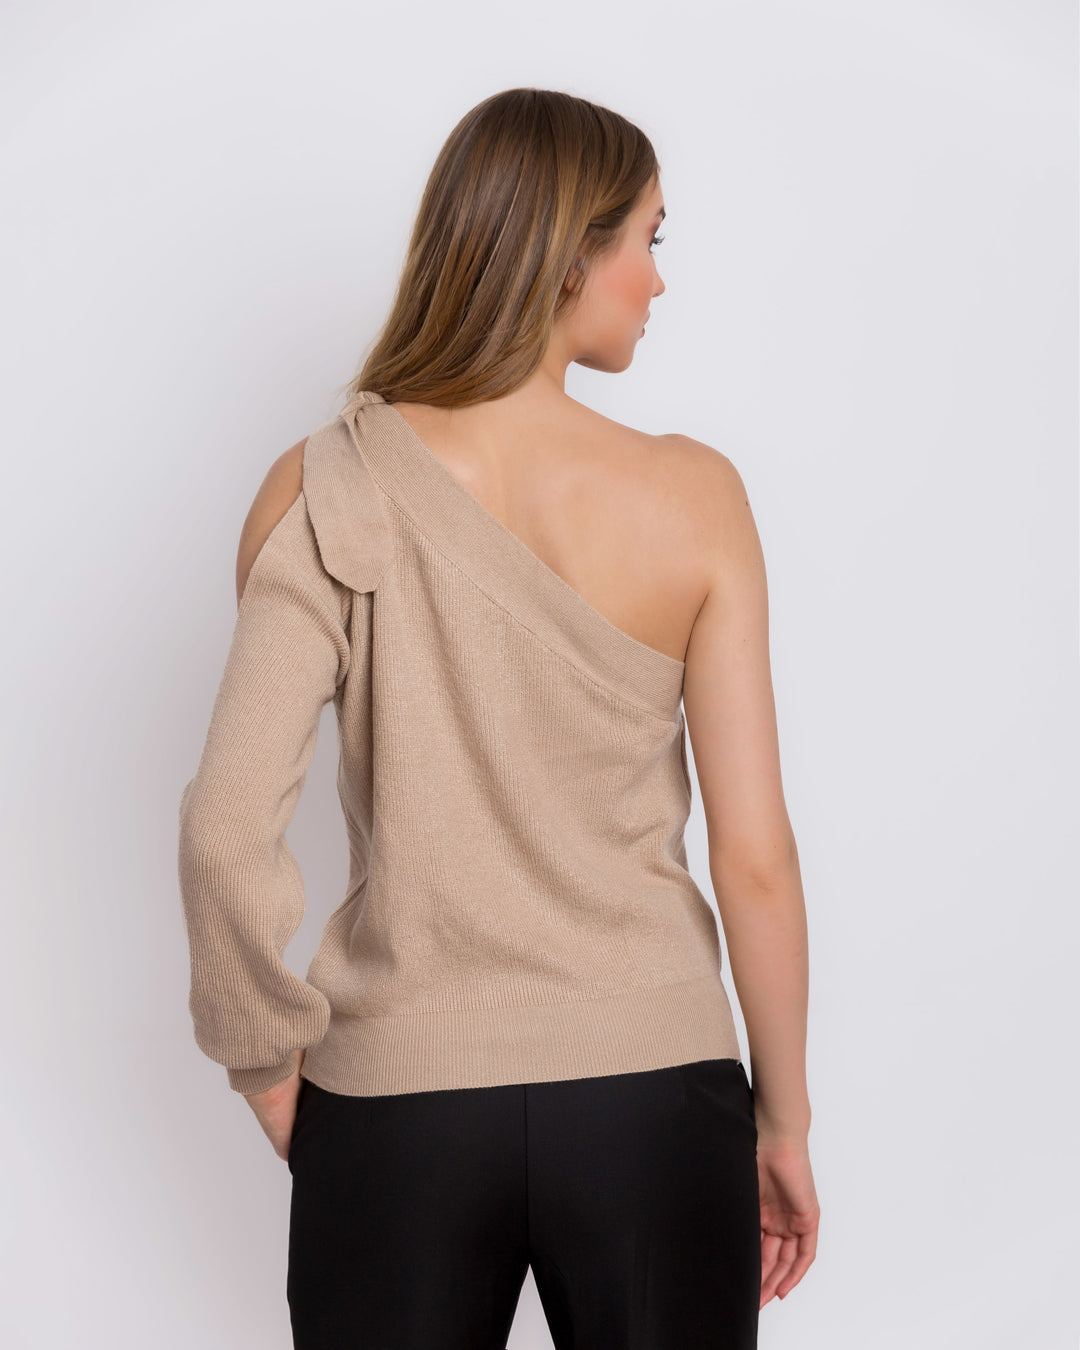 Knitted One Shoulder Top With Sleeve Cutout Detail And Tie Shoulder